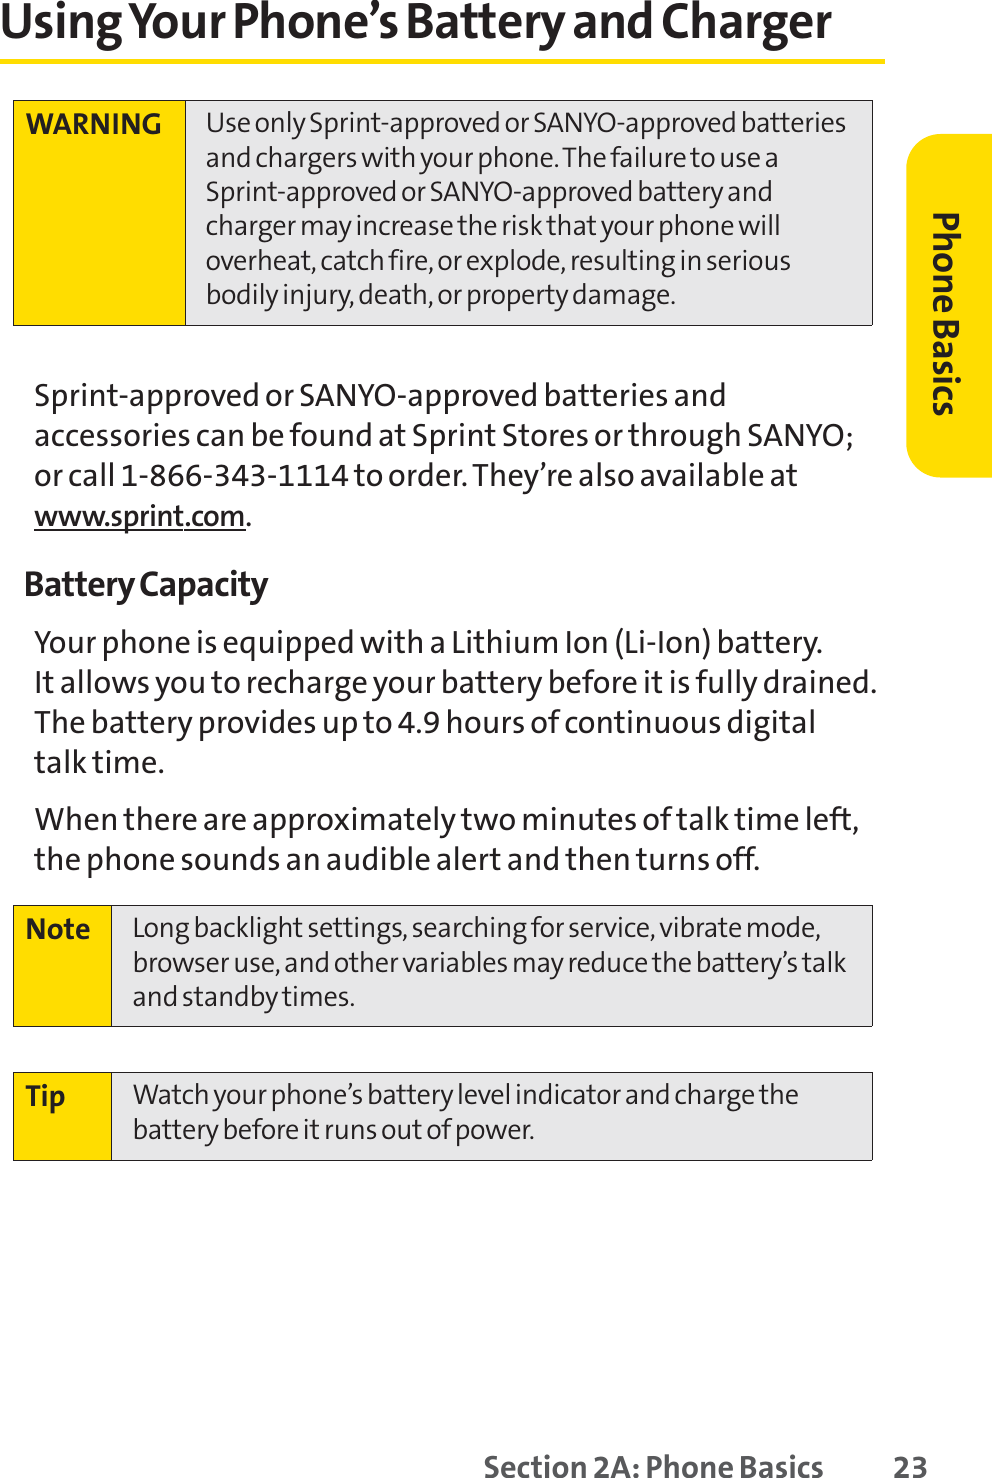 Section 2A: Phone Basics 23Using Your Phone’s Battery and ChargerSprint-approved or SANYO-approved batteries andaccessories can be found at Sprint Stores or through SANYO;or call 1-866-343-1114 to order. They’re also available atwww.sprint.com.Battery CapacityYour phone is equipped with a Lithium Ion (Li-Ion) battery. It allows you to recharge your battery before it is fully drained.The battery provides up to 4.9 hours of continuous digital talk time.When there are approximately two minutes of talk time left,the phone sounds an audible alert and then turns off.Tip Watch your phone’s battery level indicator and charge thebattery before it runs out of power.Note Long backlight settings, searching for service, vibrate mode,browser use, and other variables may reduce the battery’s talkand standby times.WARNING Use only Sprint-approved or SANYO-approved batteriesand chargers with your phone. The failure to use aSprint-approved or SANYO-approved battery andcharger may increase the risk that your phone willoverheat, catch fire, or explode, resulting in seriousbodily injury, death, or property damage.Phone Basics